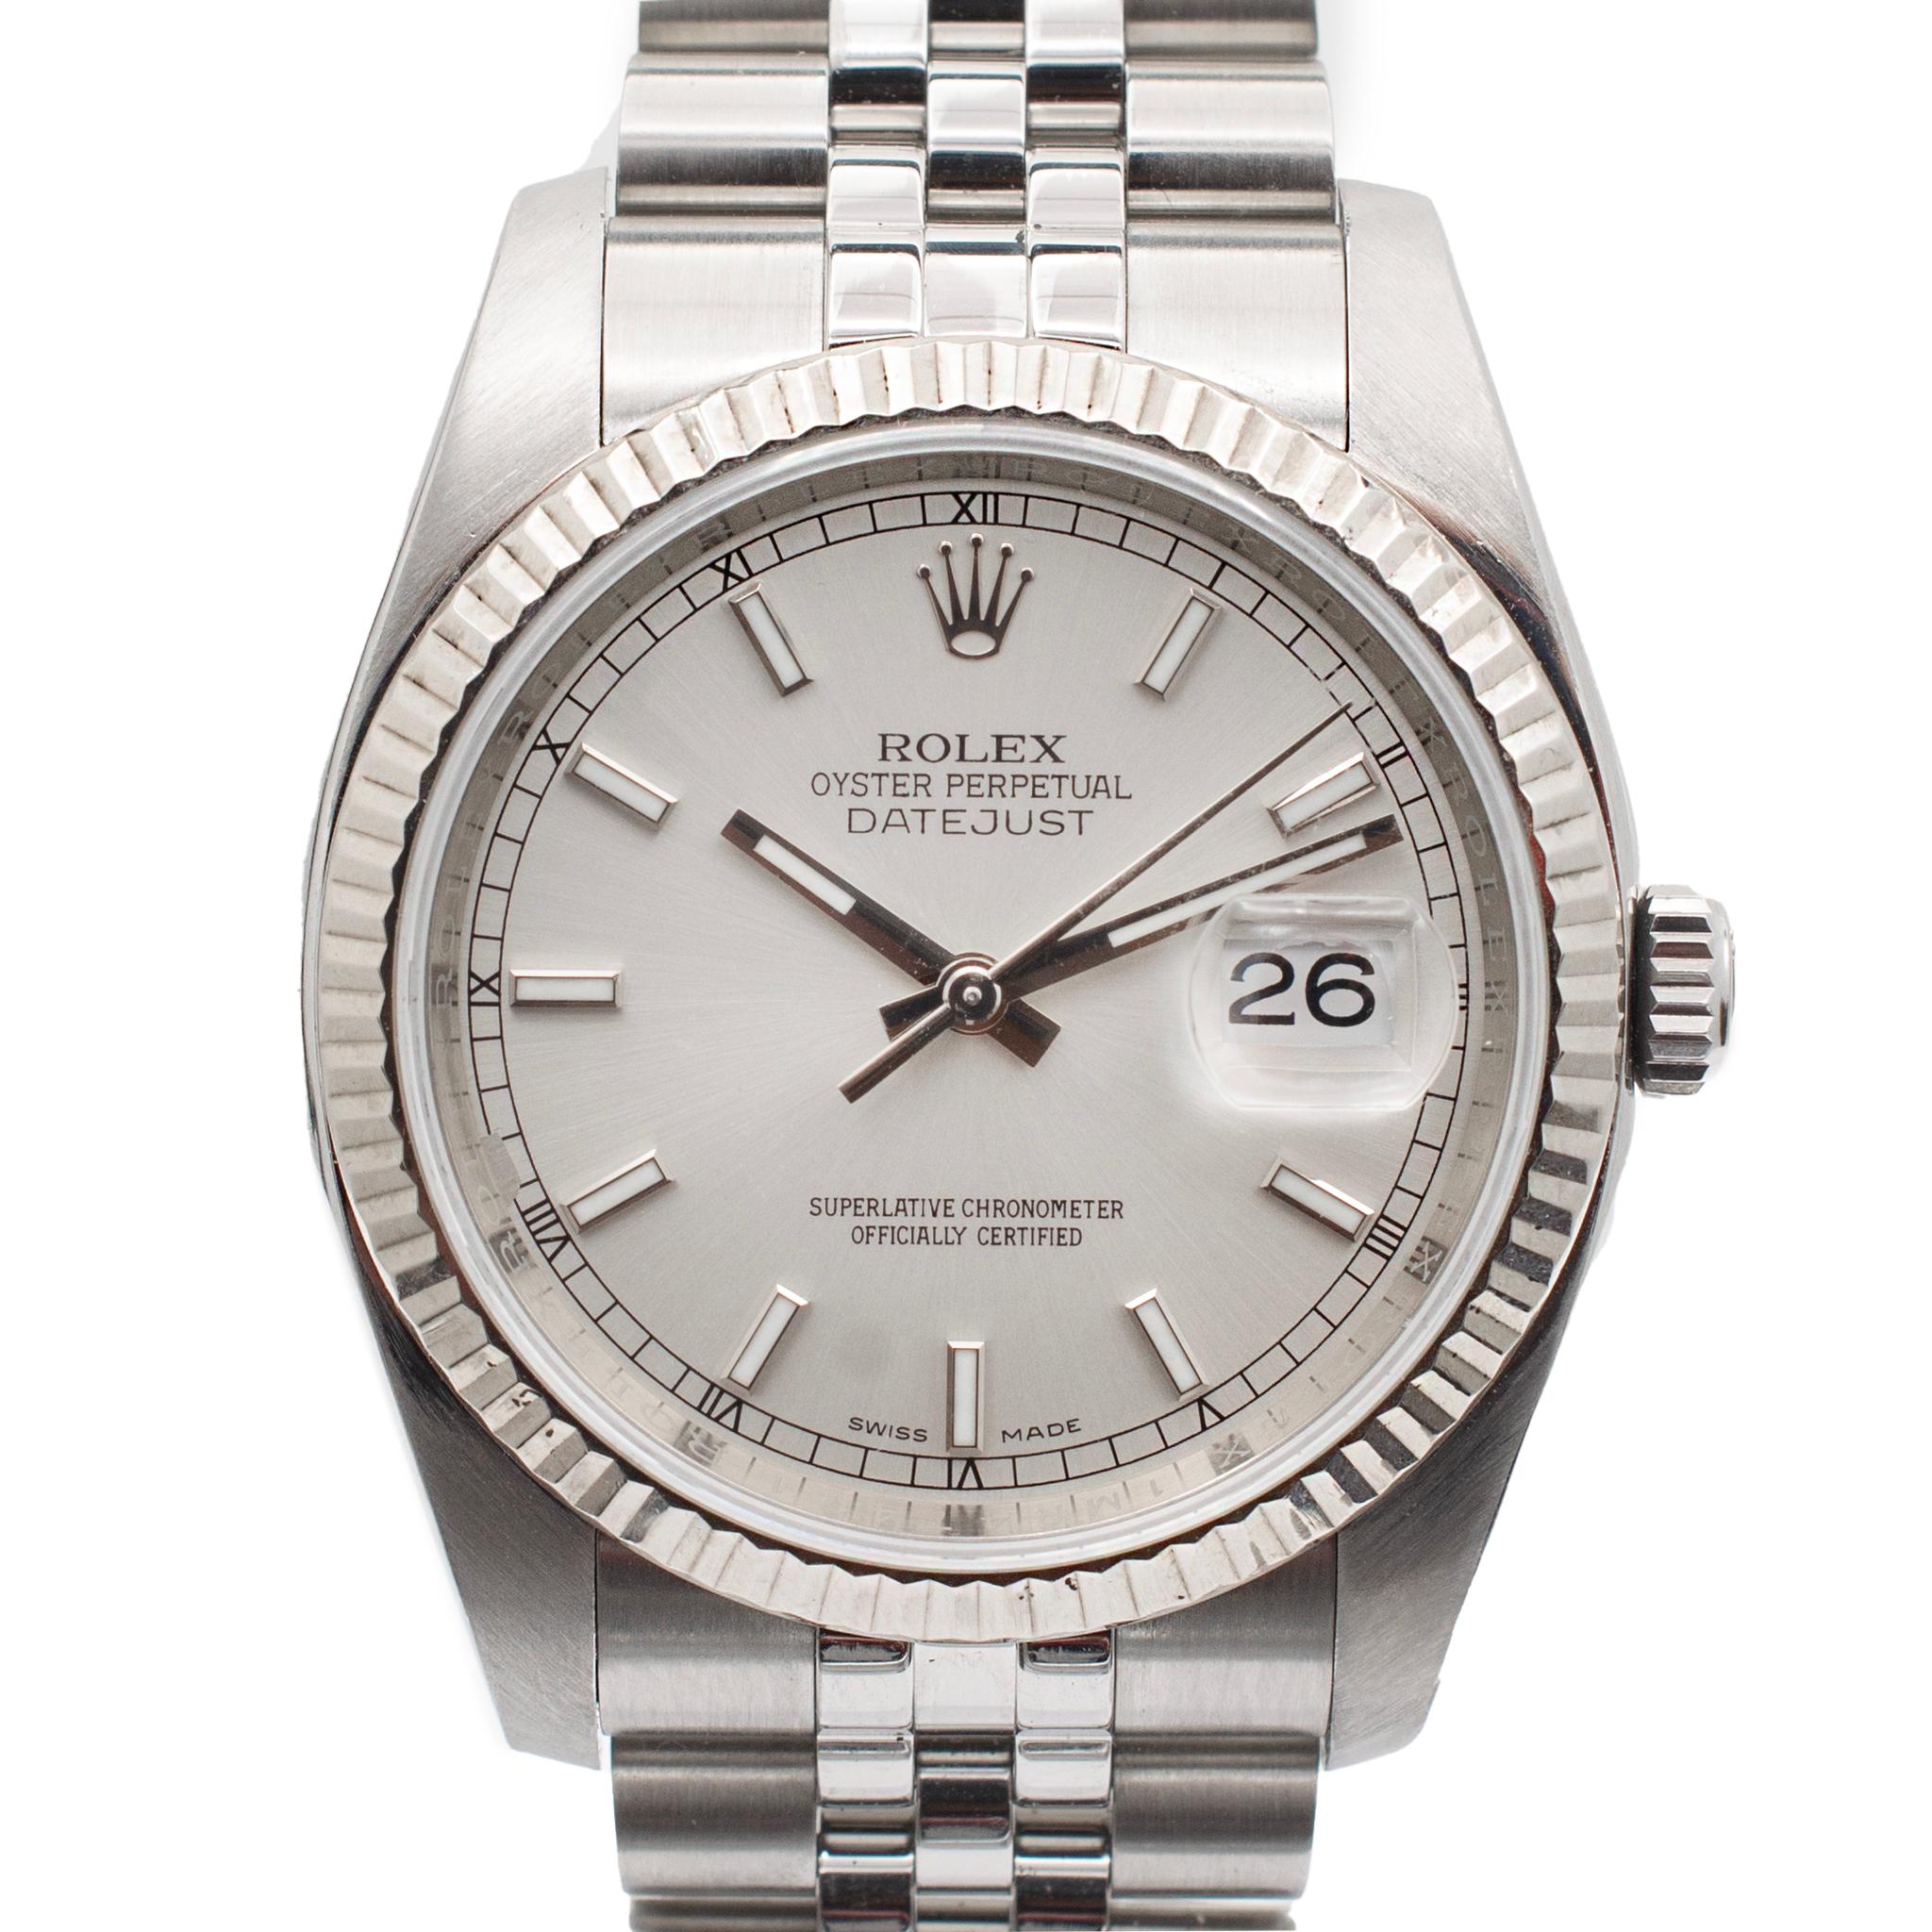 Brand: Rolex

Model Datejust 36

Total Weight: 115.10 grams

Comes with original box. In excellent condition

23 Jubilee Links

After market sapphire crystal

Pre-owned. Might show minor signs of wear.

Datejust 36 Stainless Steel Fluted / Jubilee /